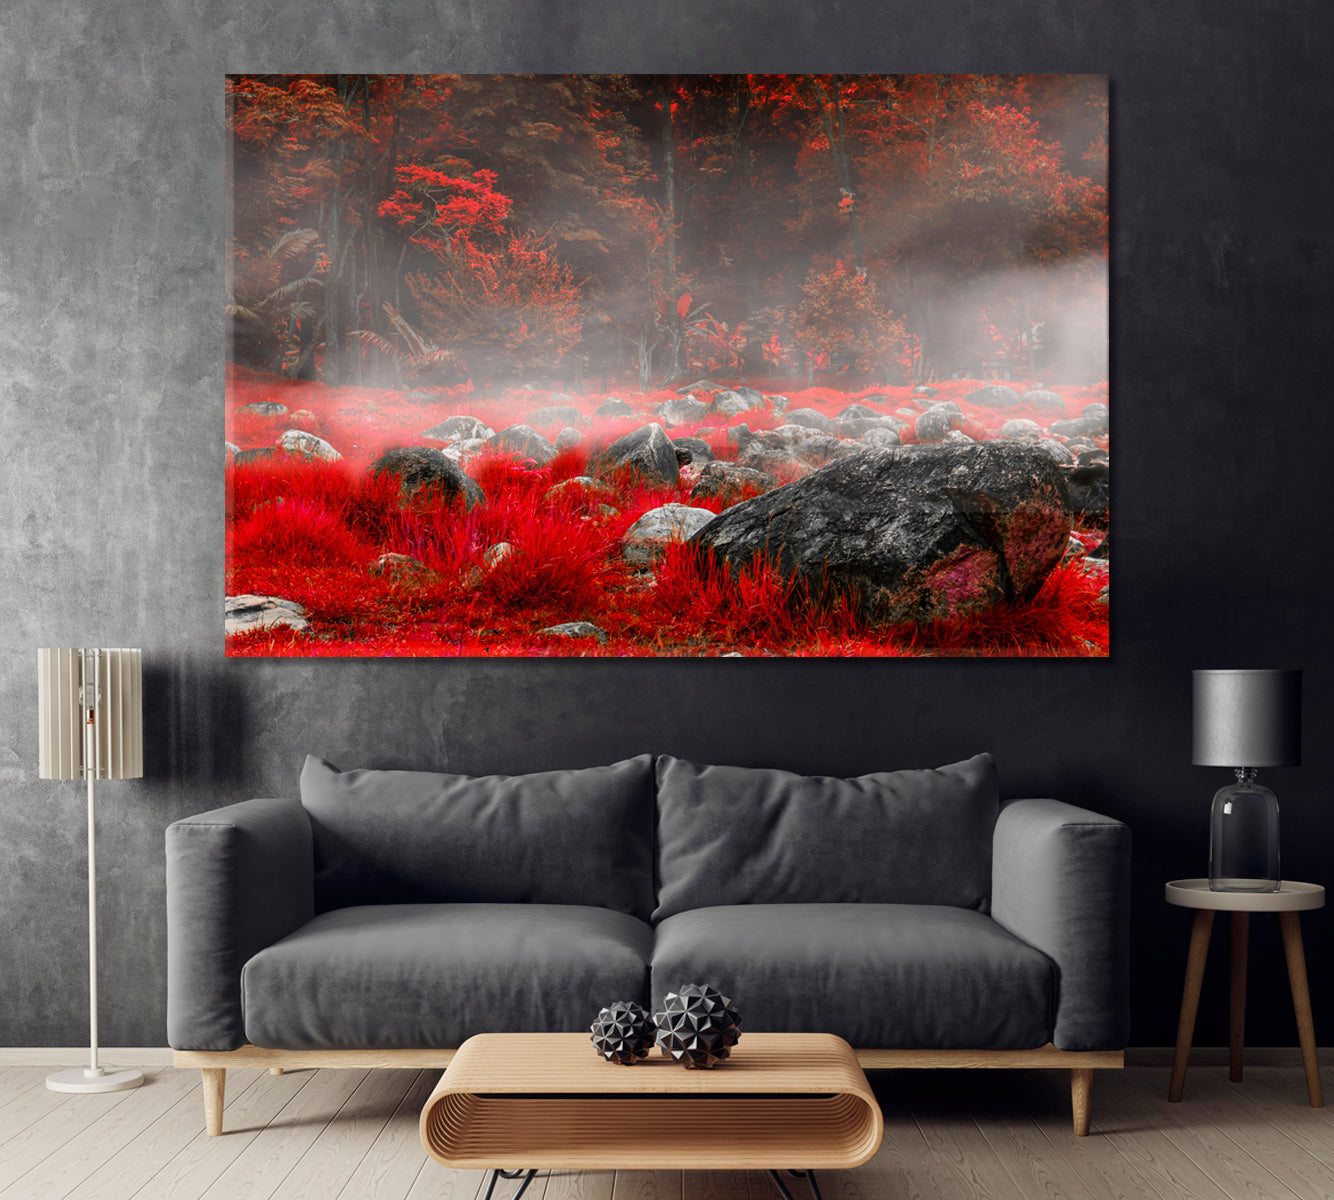 Red Beach Panjin Canvas Print ArtLexy 1 Panel 24"x16" inches 